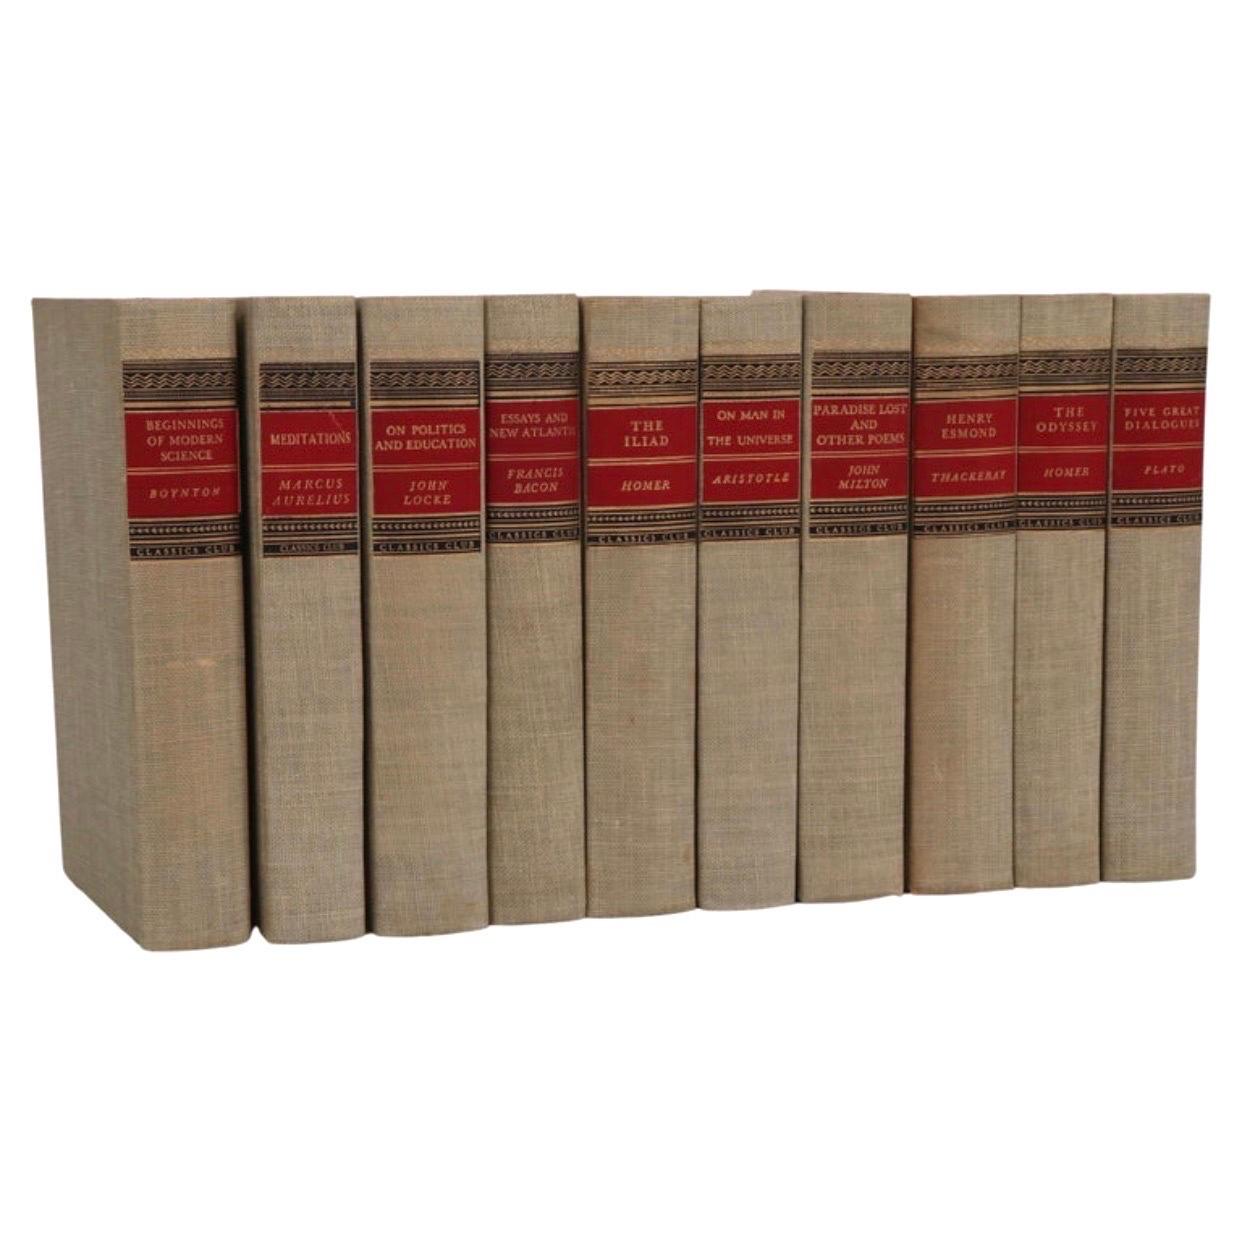 A collection of ten Classics Club books from the 1940s. Published between 1942-1948, printed in the United States of America. Hardcovers.